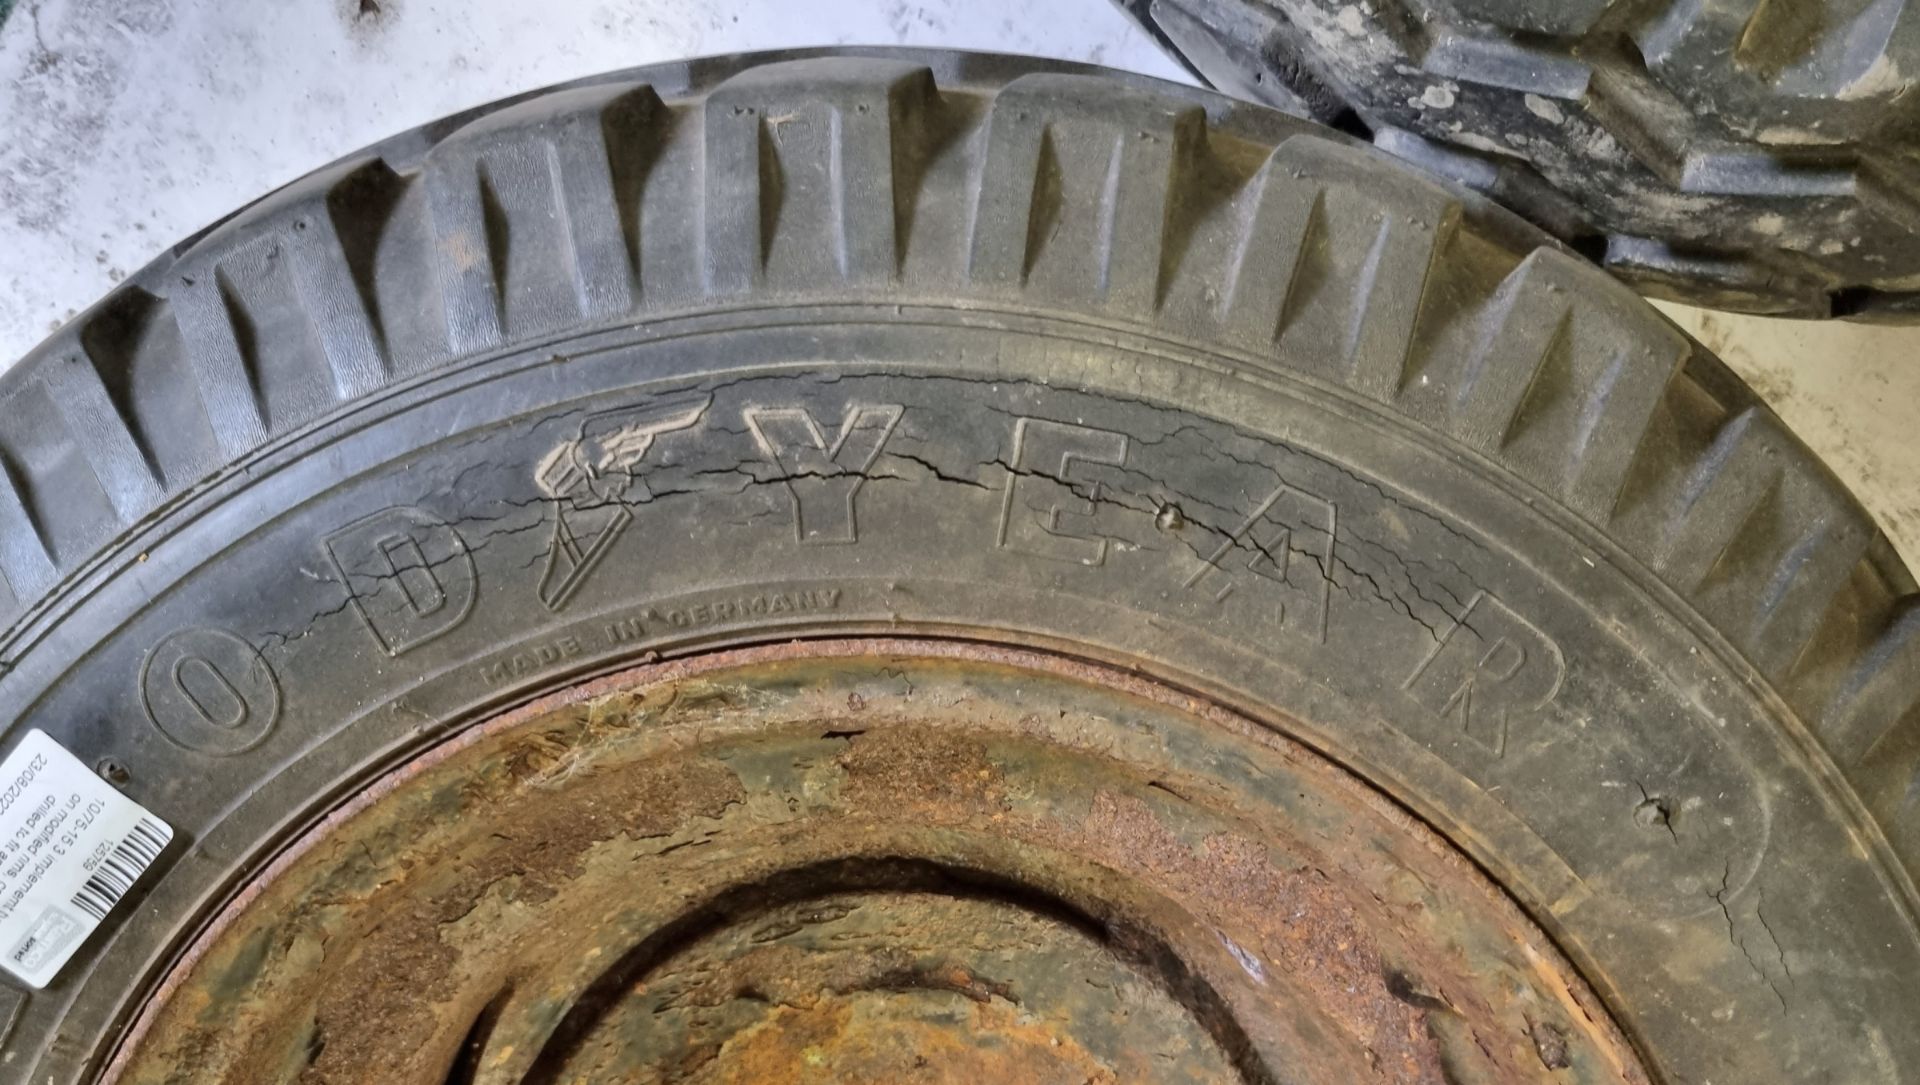 2x 10/75-15.3 implement tyres on modified rims - can be drilled to fit any size - Image 7 of 7